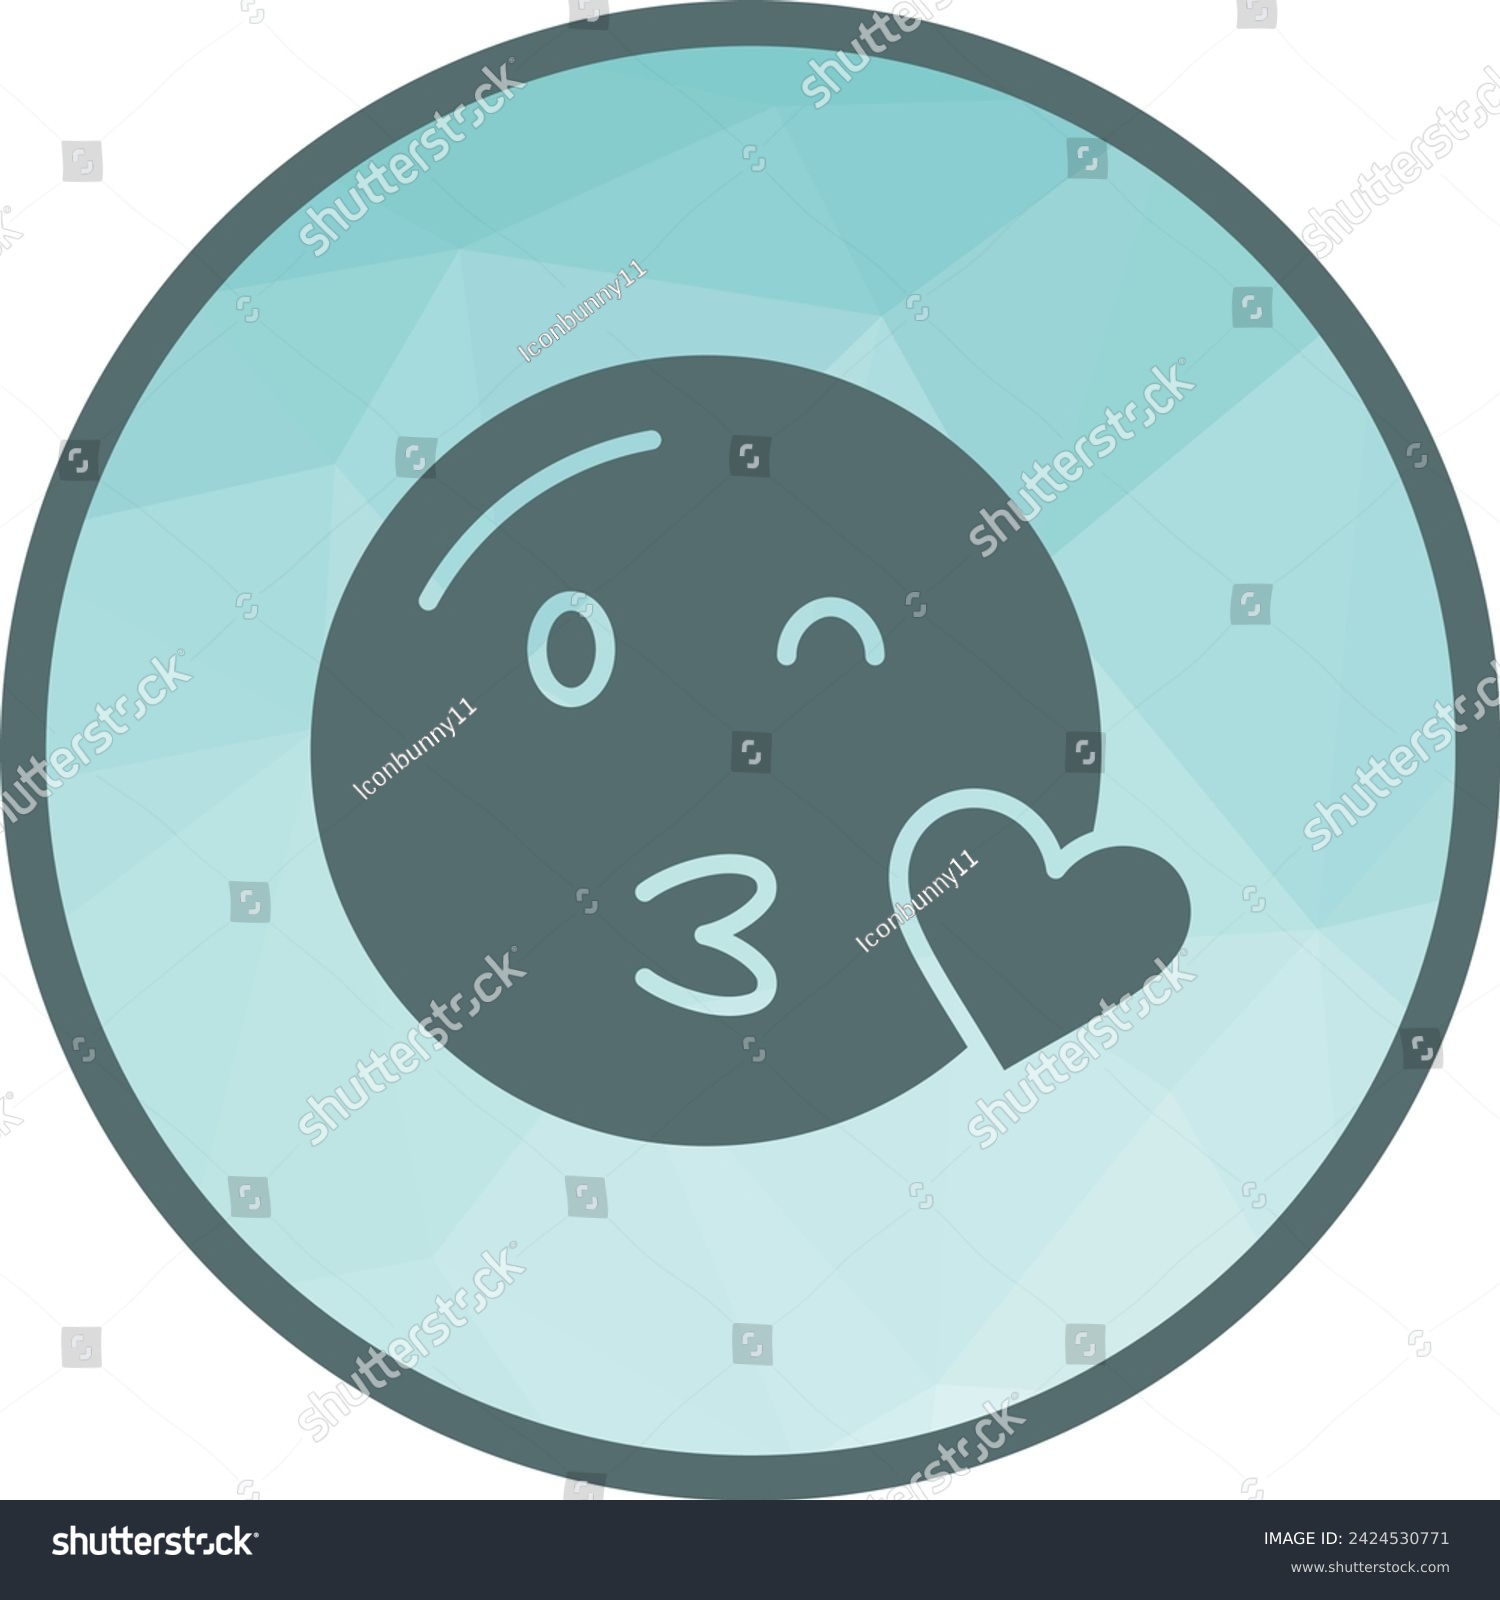 SVG of Face Blowing a Kiss icon vector image. Suitable for mobile application web application and print media. svg